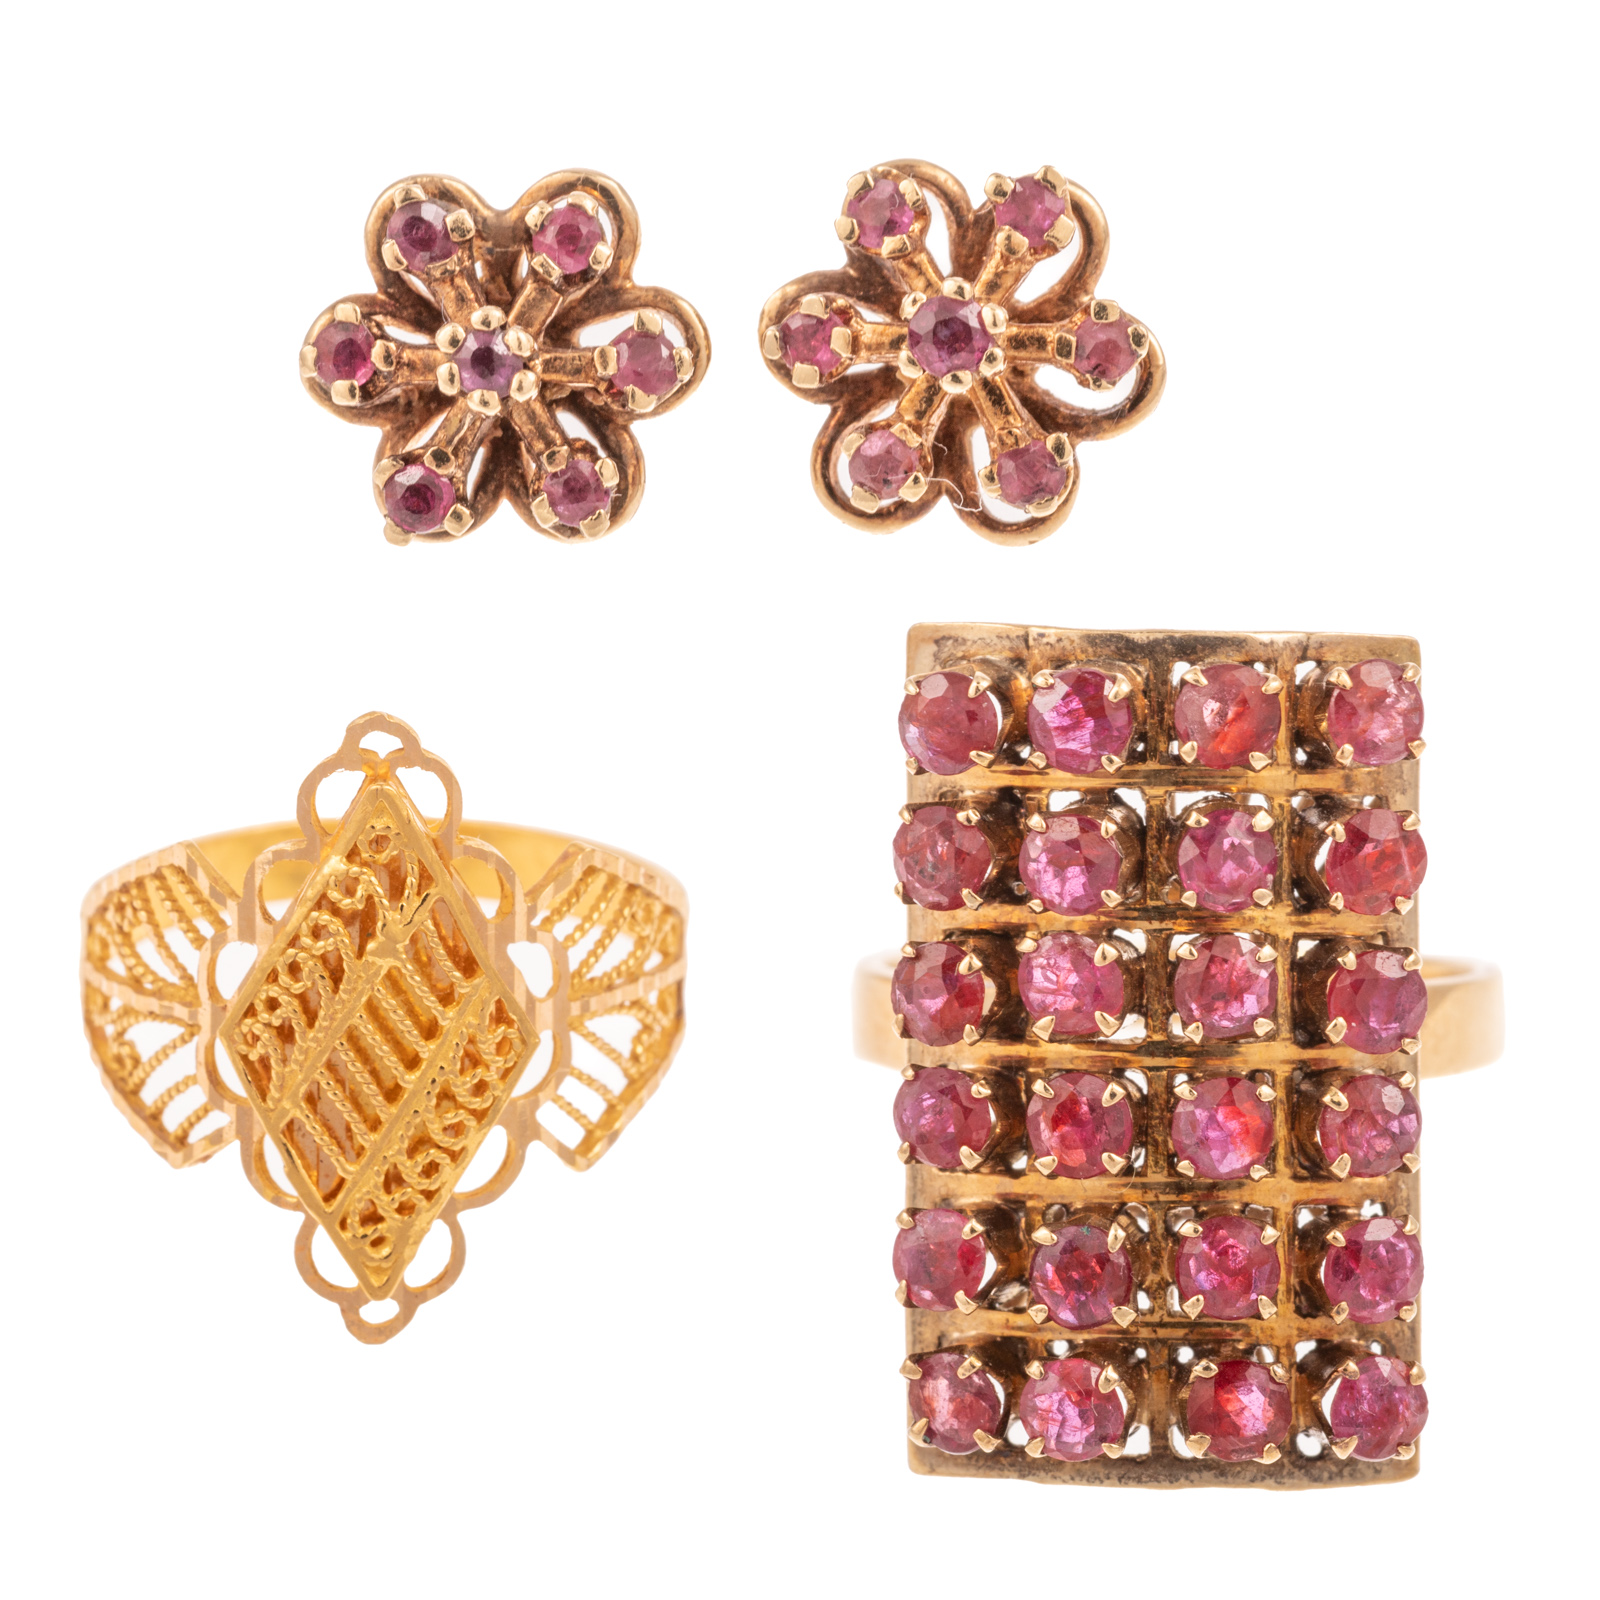 A COLLECTION OF GOLD & RUBY JEWELRY